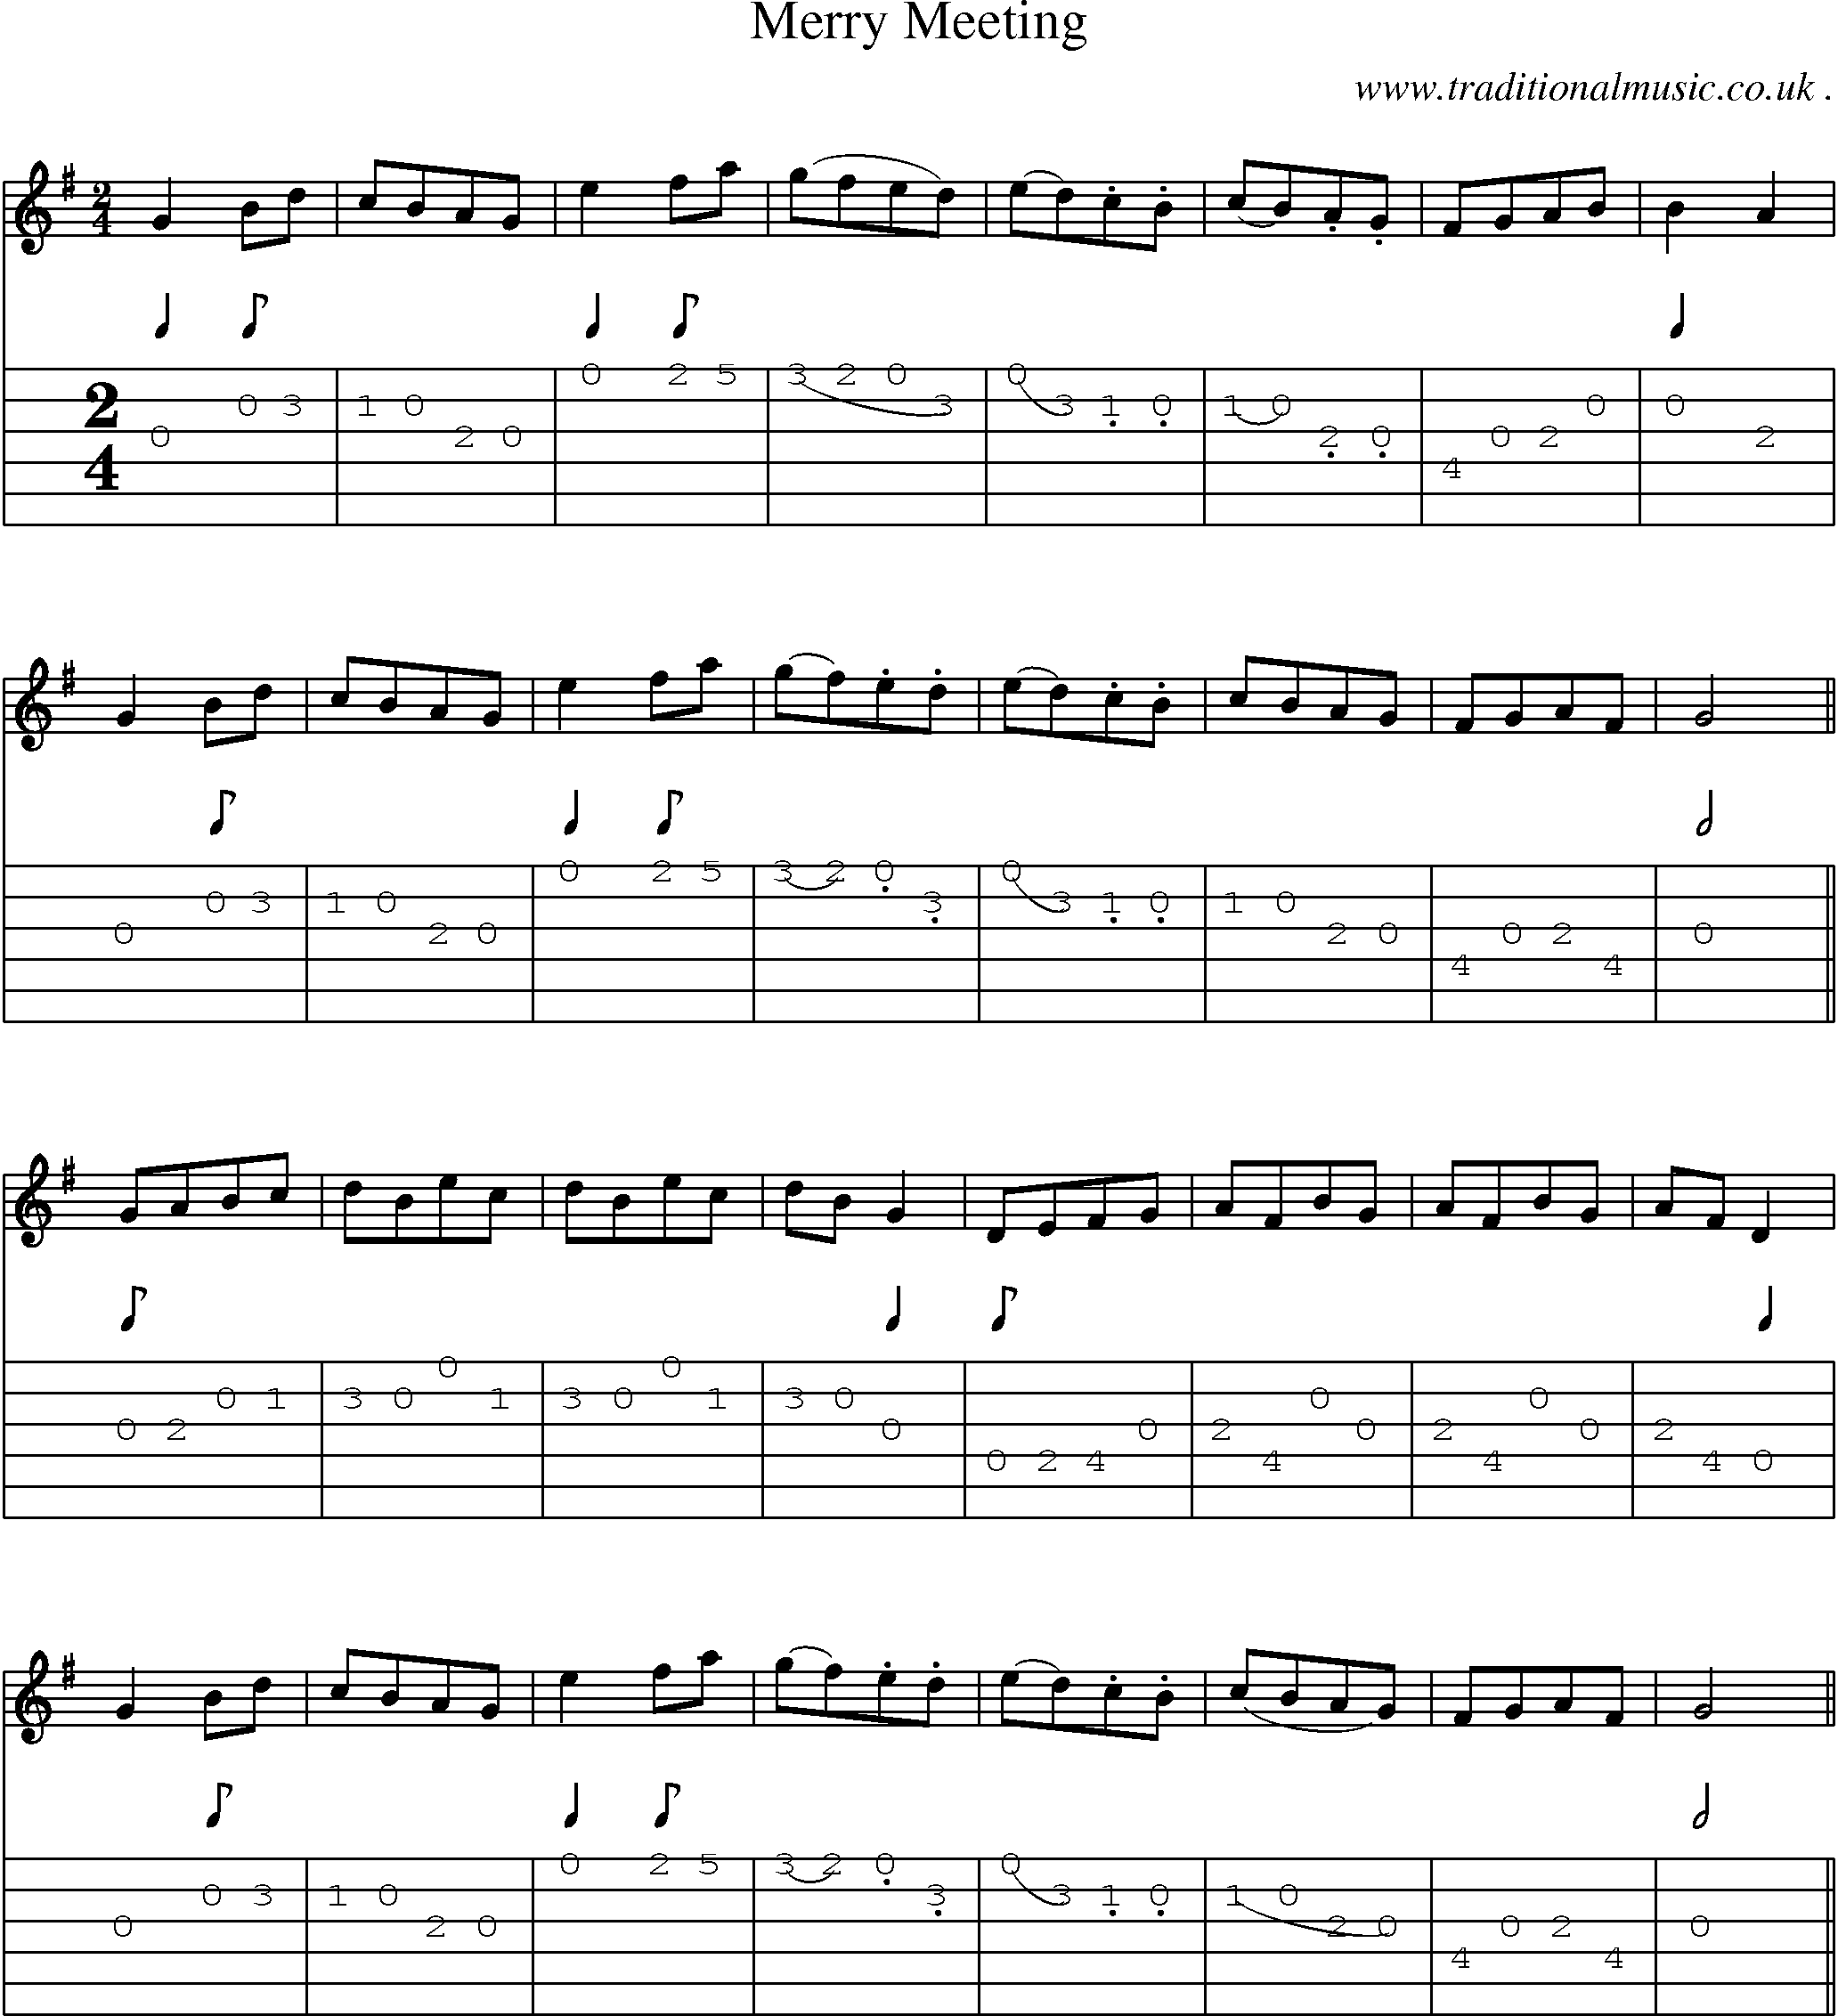 Sheet-Music and Guitar Tabs for Merry Meeting